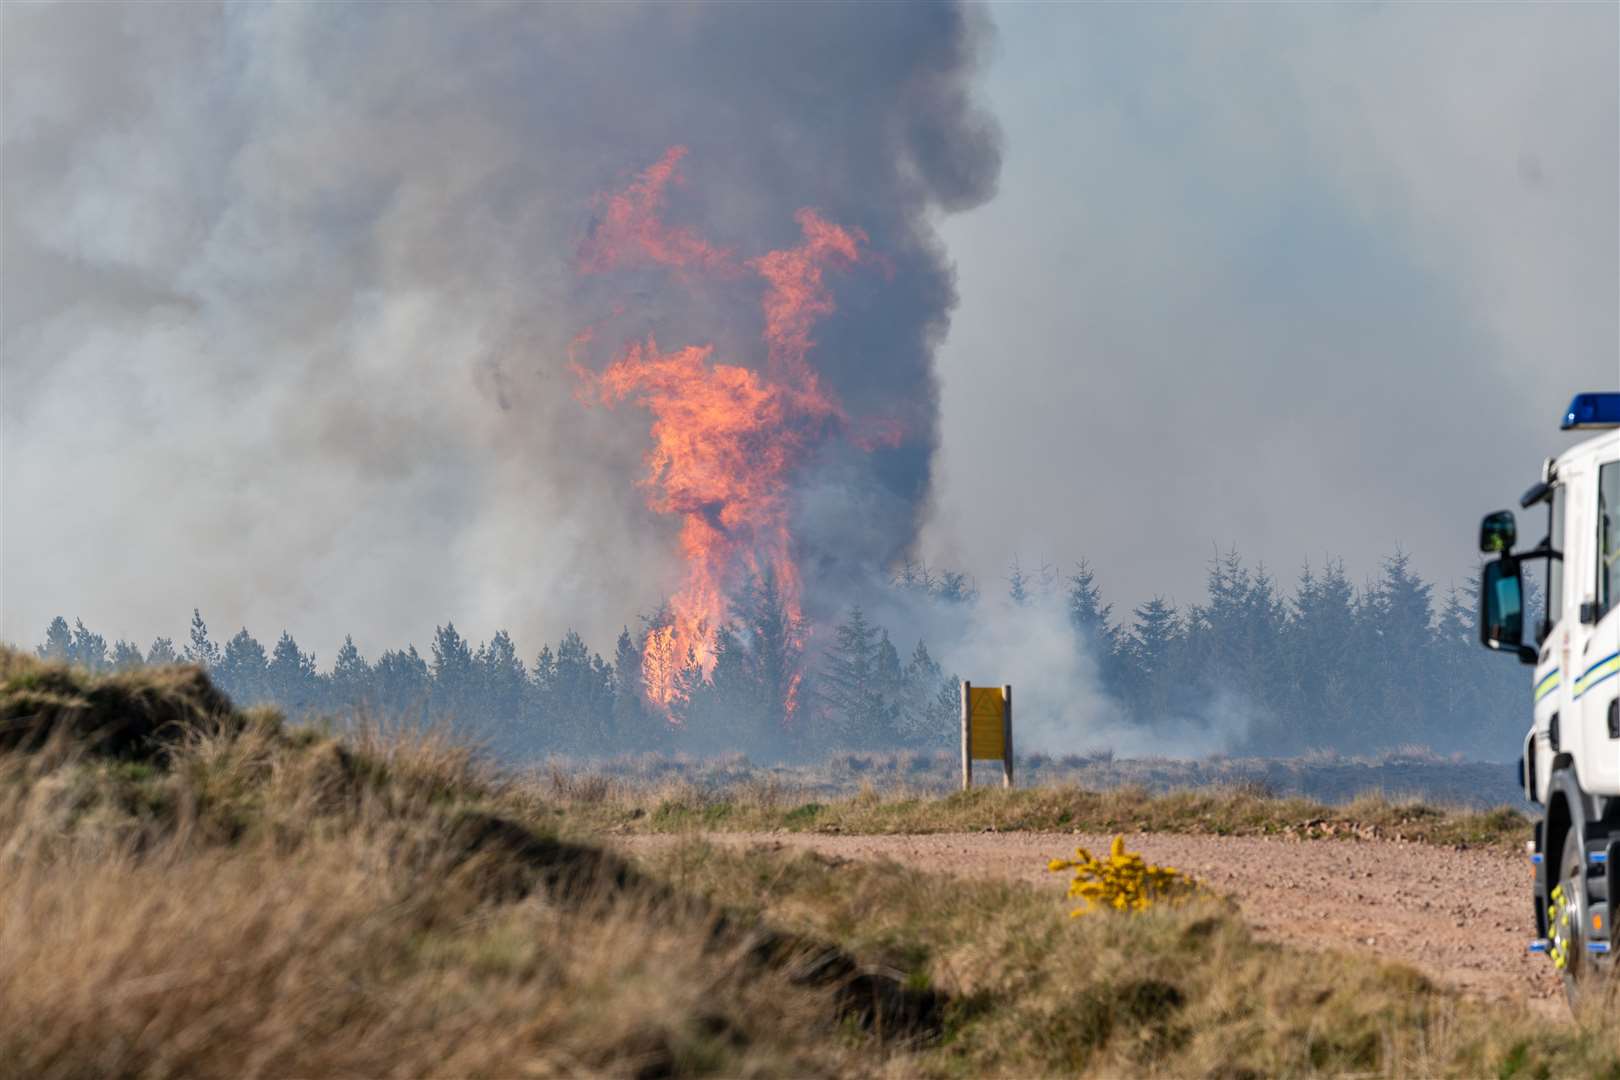 A raging wildfire at Dunphail in May 2019.